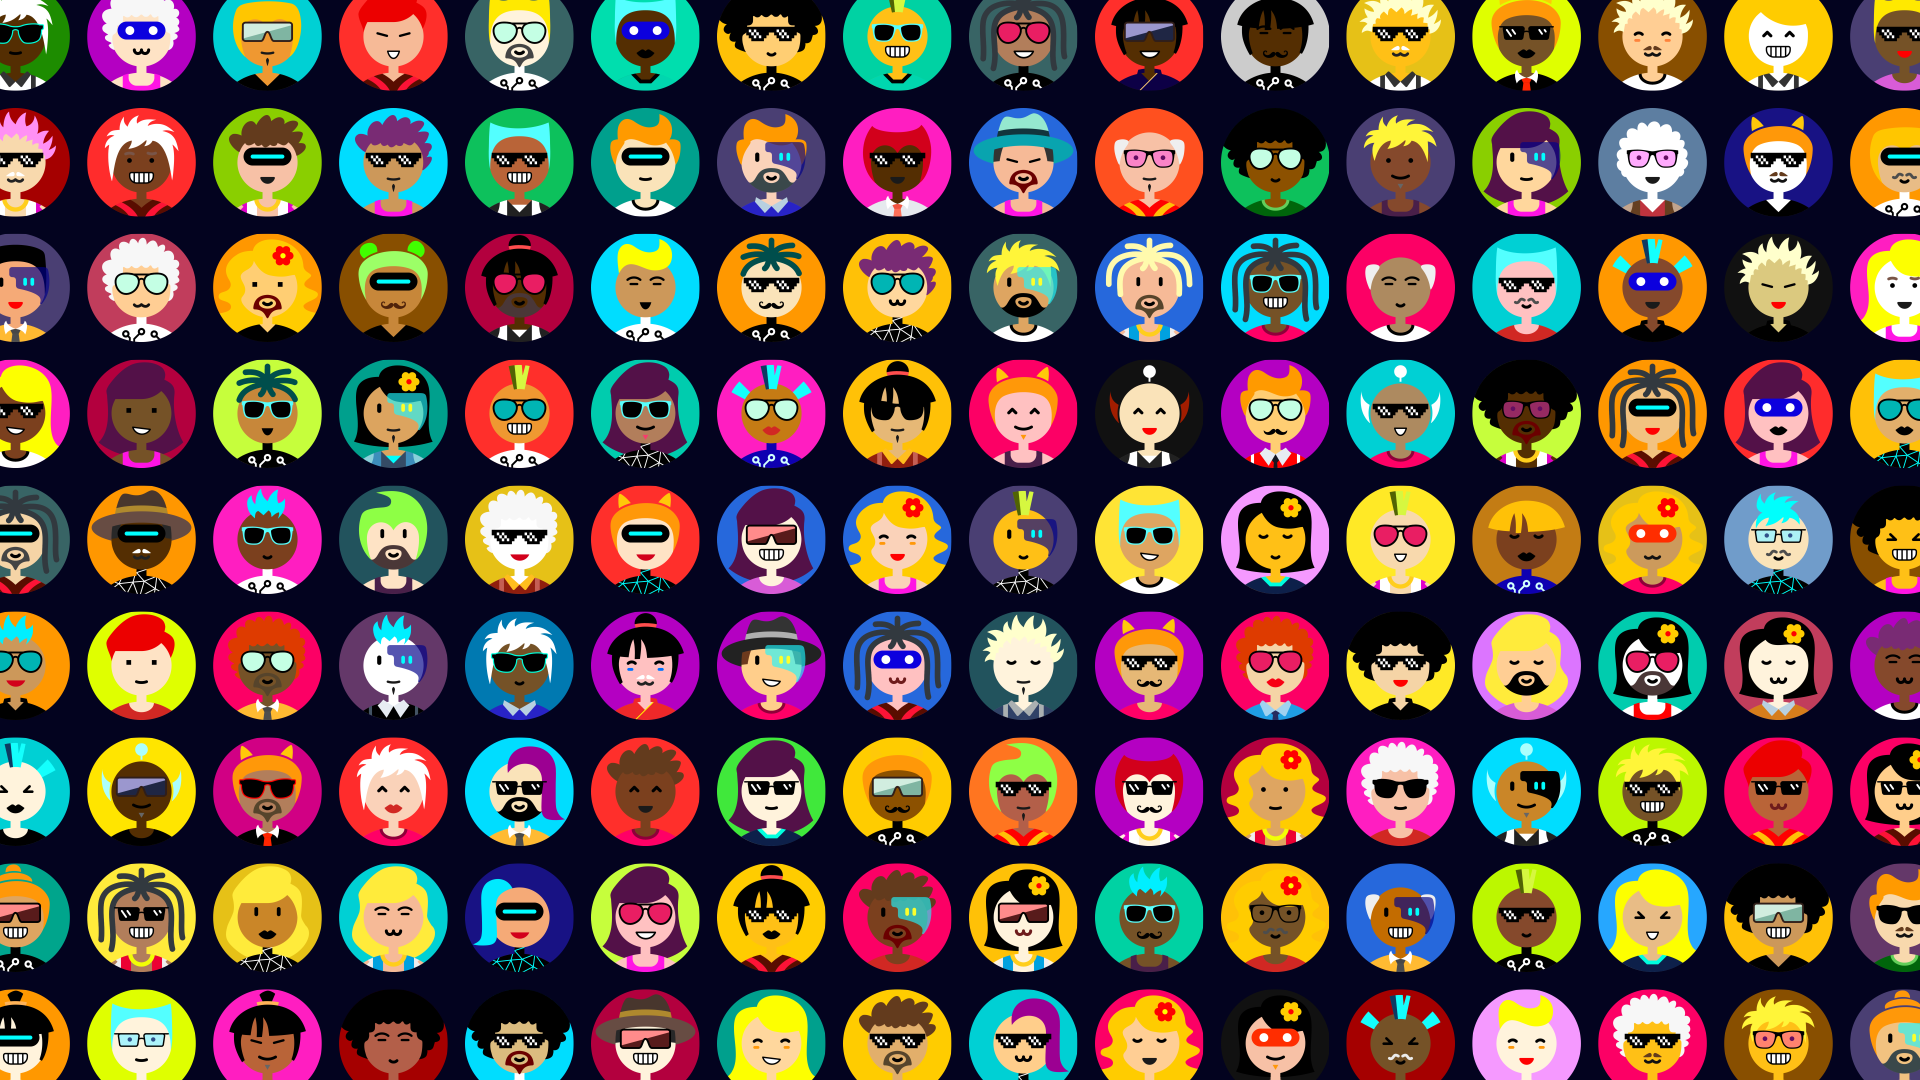 Avatar Vector Art Icons and Graphics for Free Download